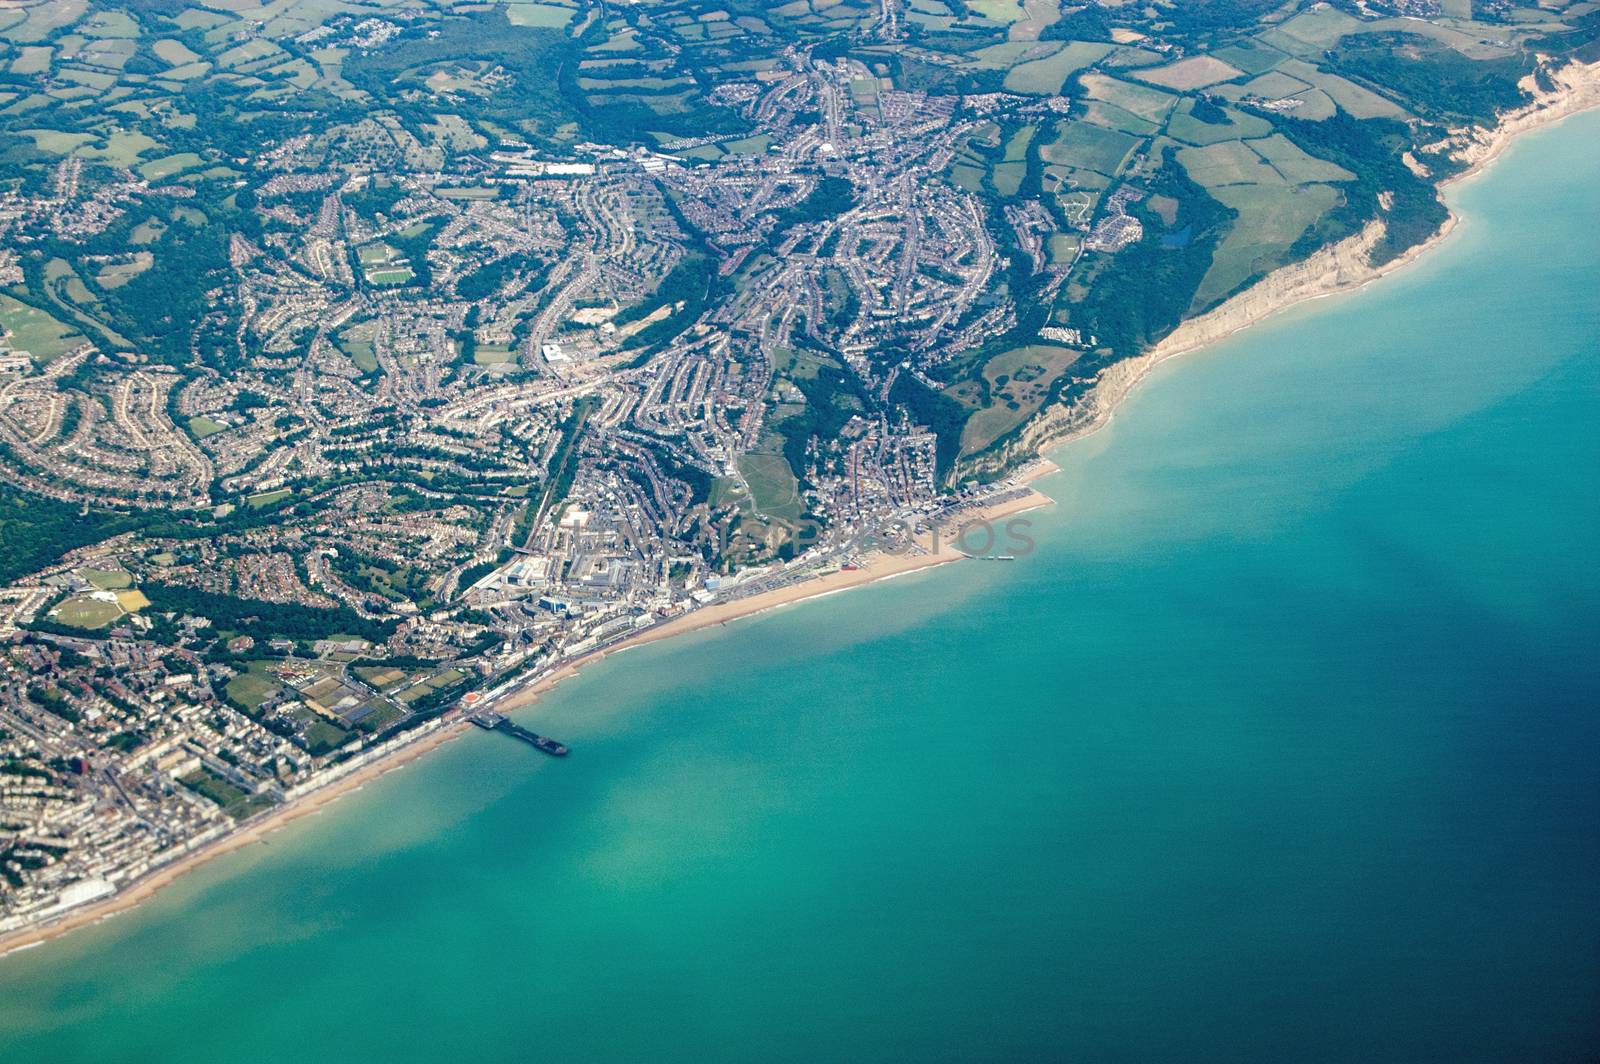 View from above of the seaside town and historic battle site of Hastings, East Sussex, England.